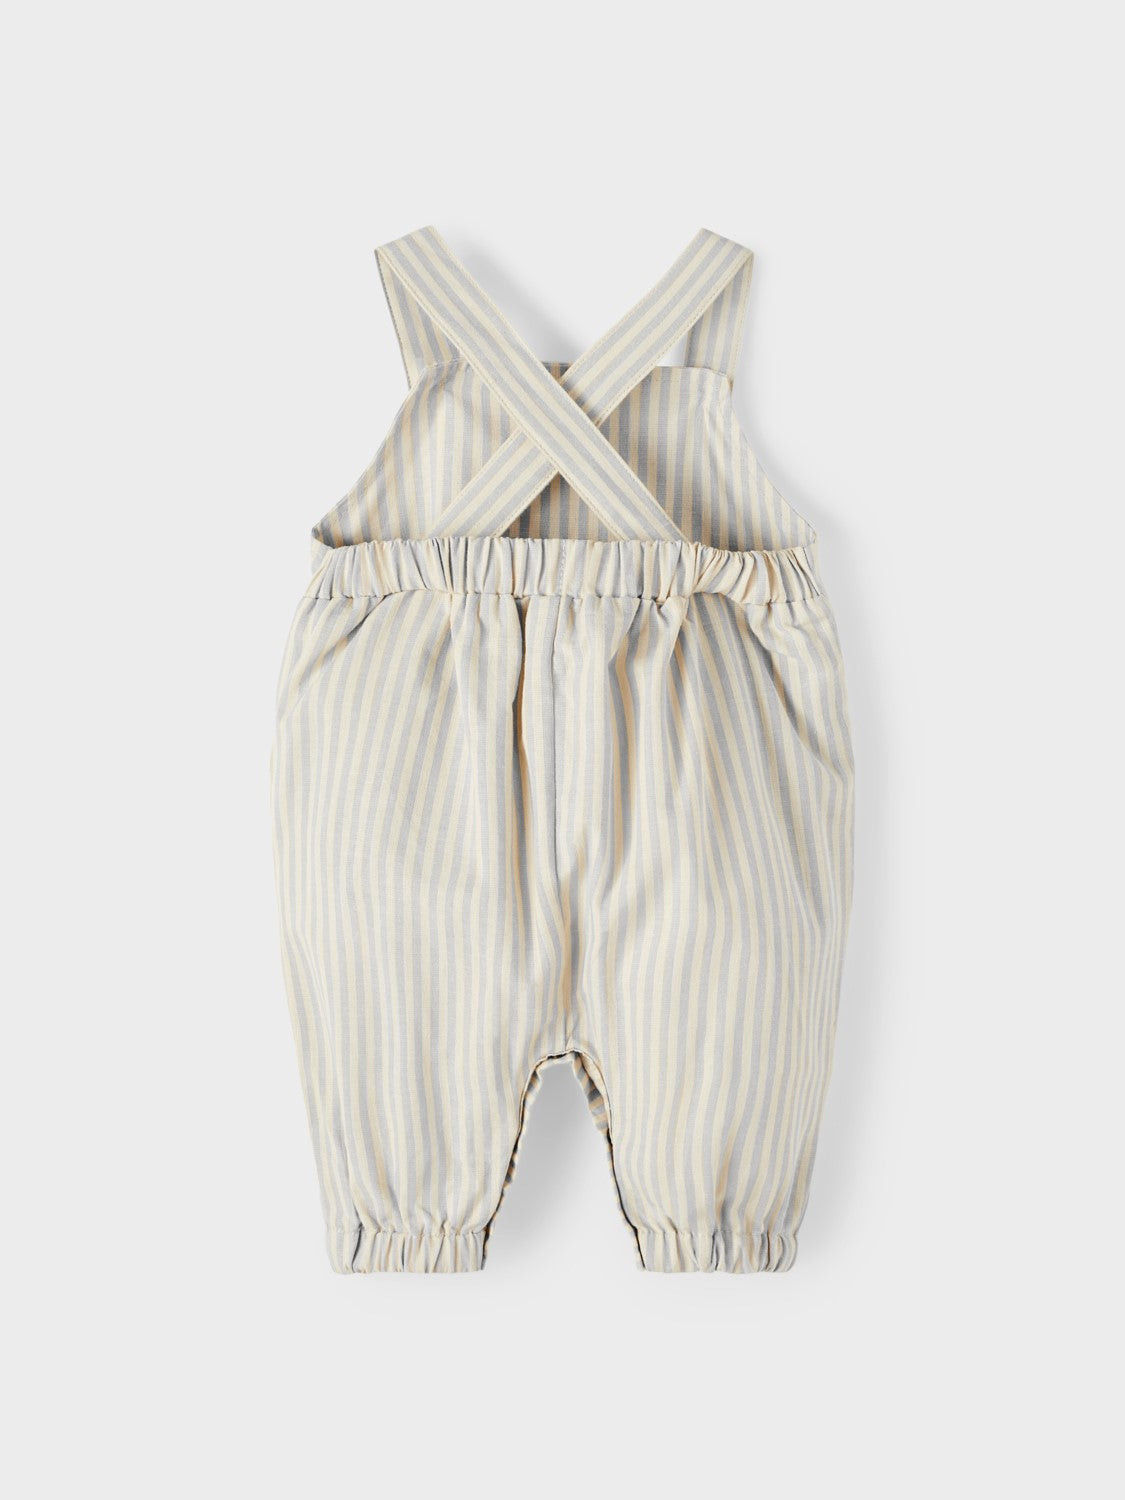 Lil Atelier Diogo Loose Overall - Harbor Mist